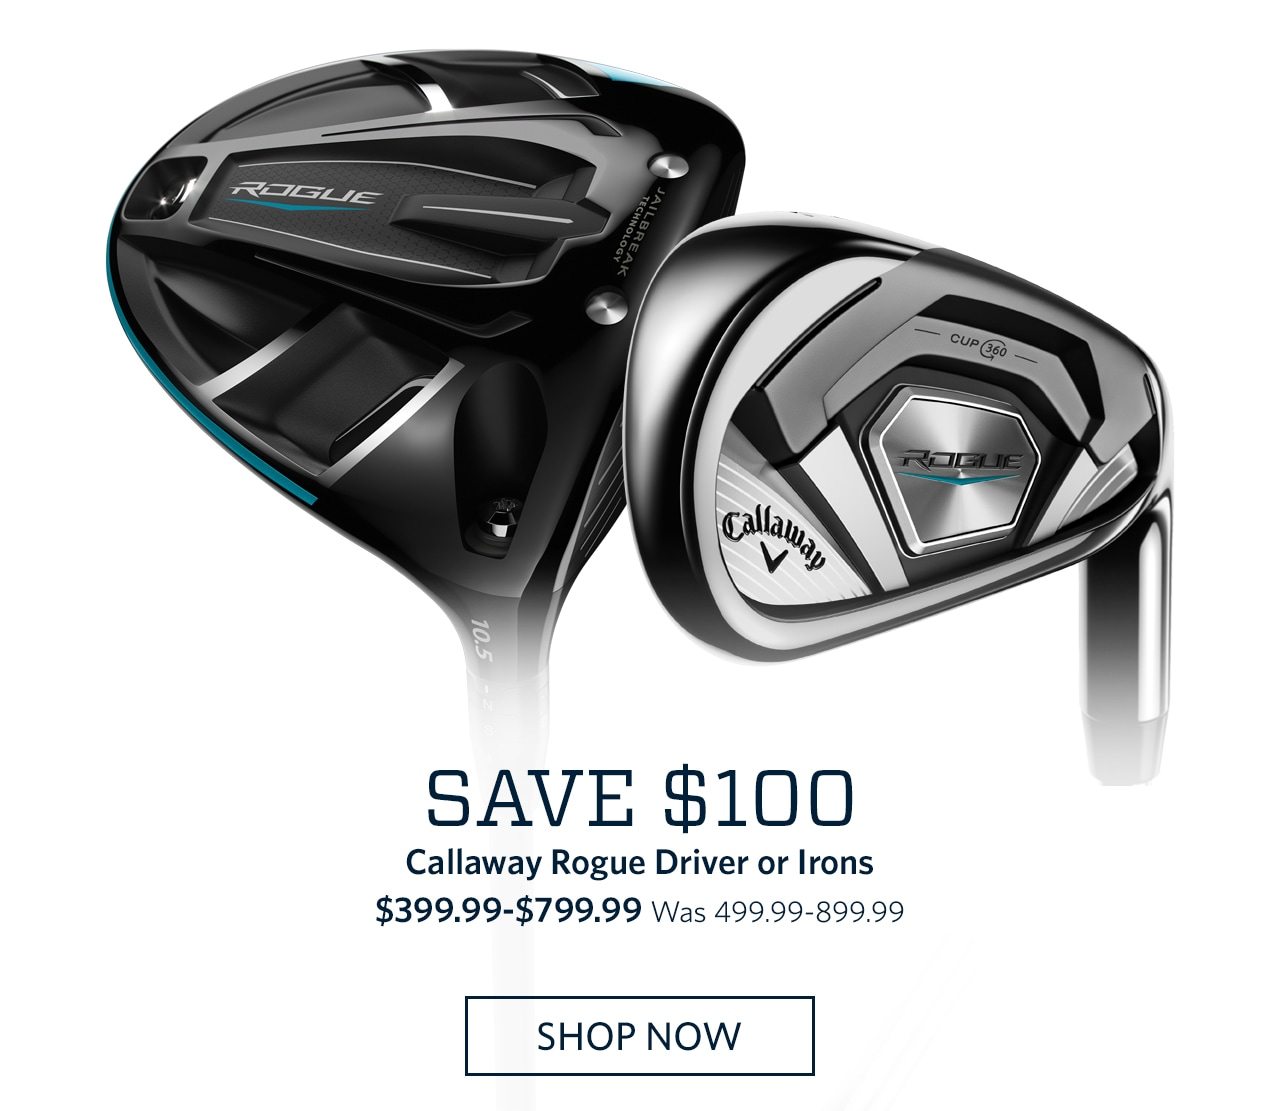 Save $100 | Callaway Rogue Driver or Irons | $399.99-$799.99 | Was 499.99-899.99 | SHOP NOW